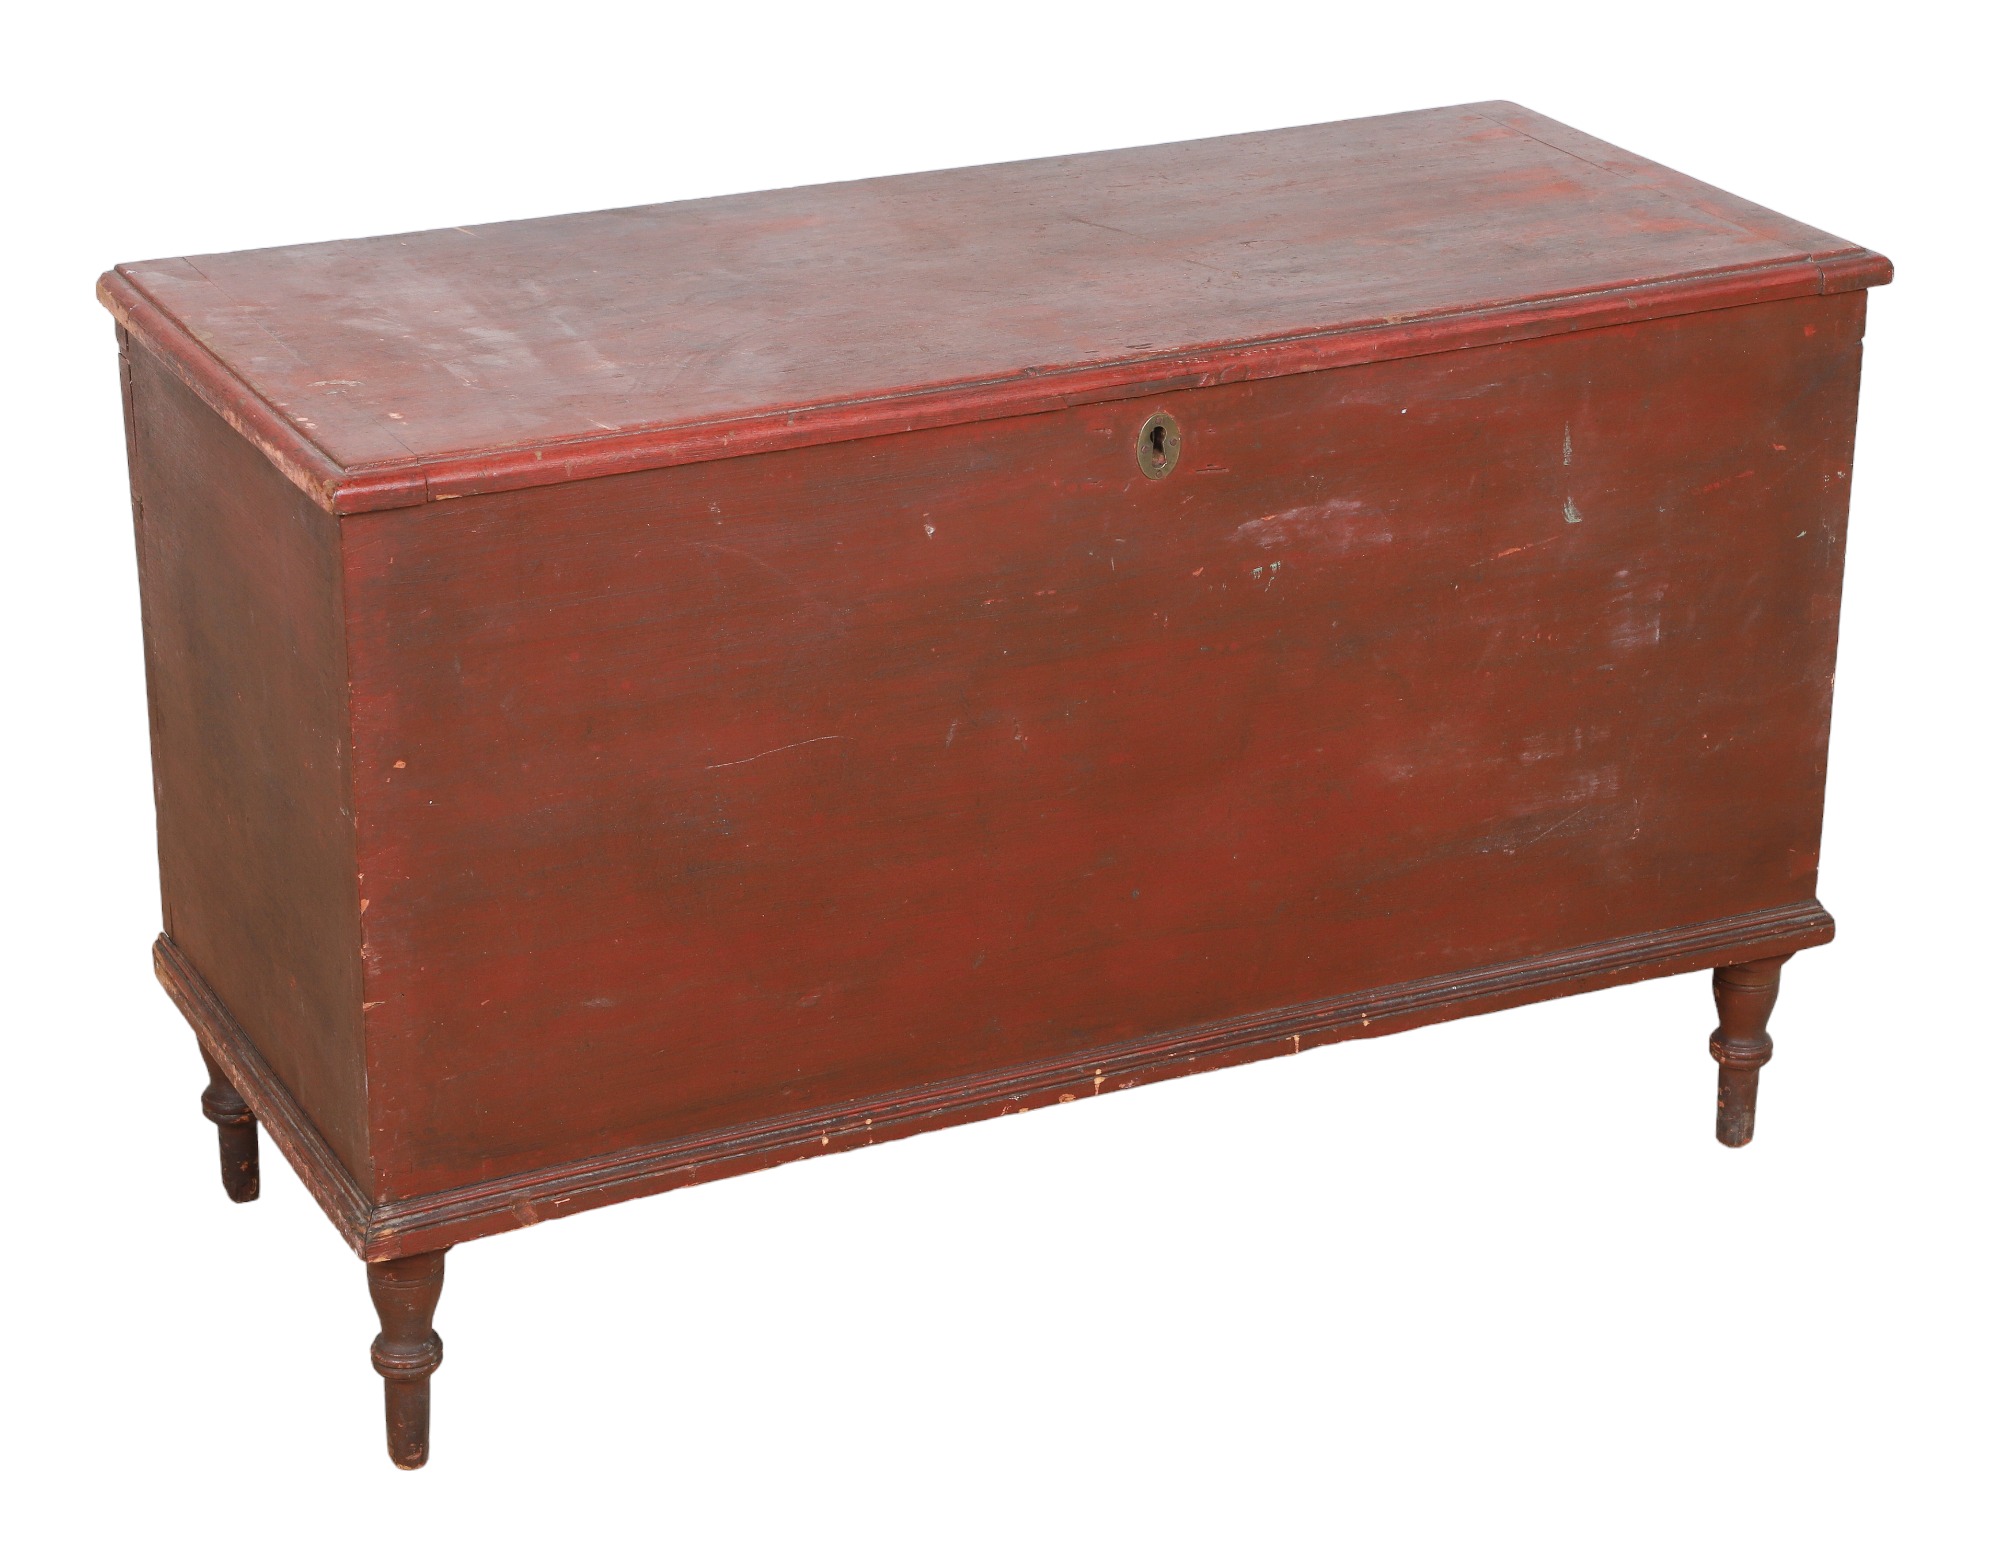 19th c Red painted blanket chest  3ca3a4